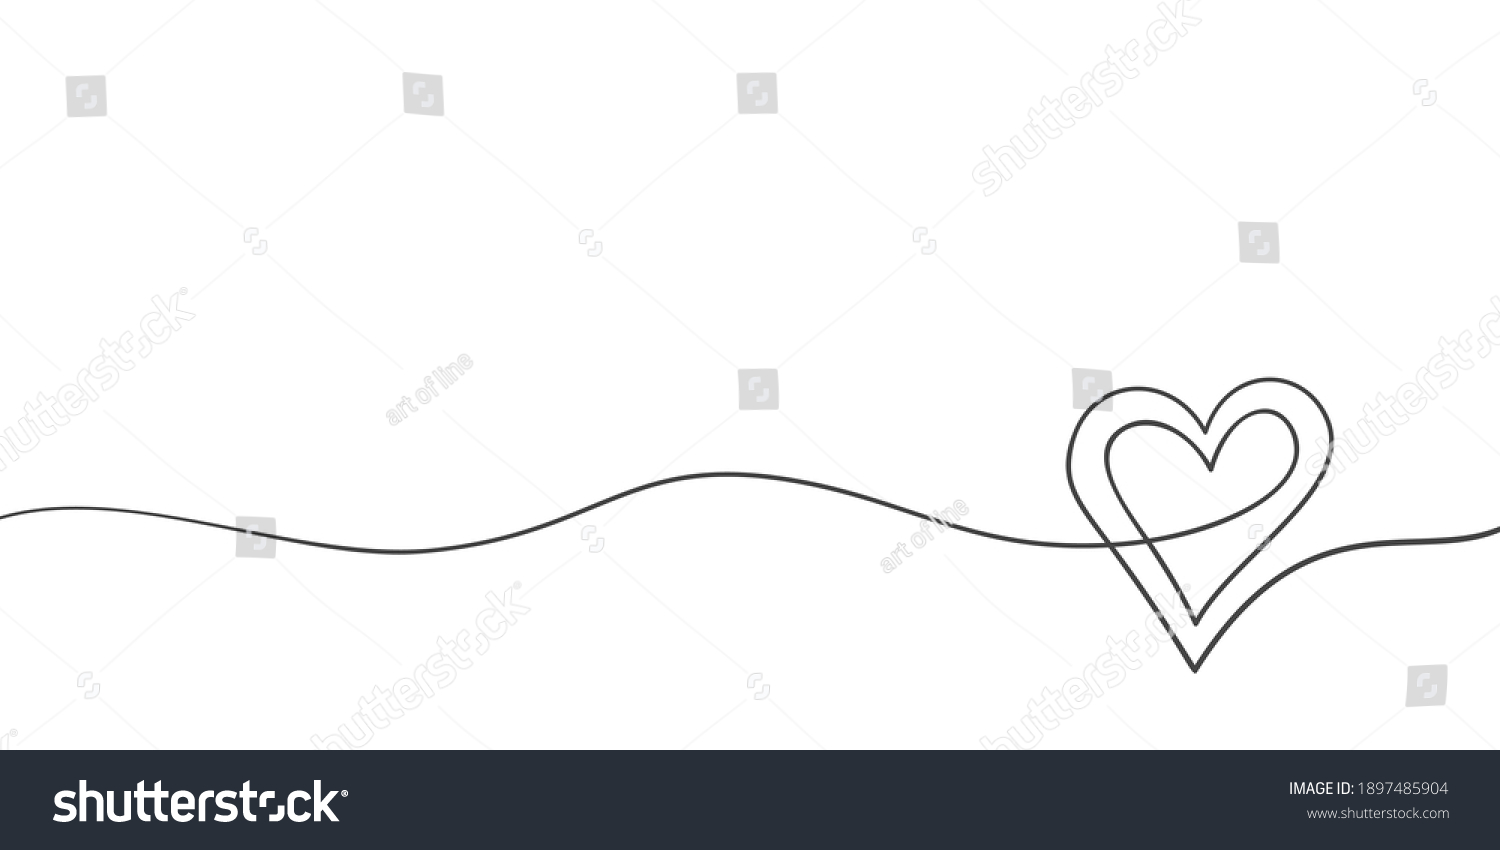 SVG of Heart continuous one line drawing, Double heart on wavy line, Black and white vector minimalist illustration of love concept made of one line svg